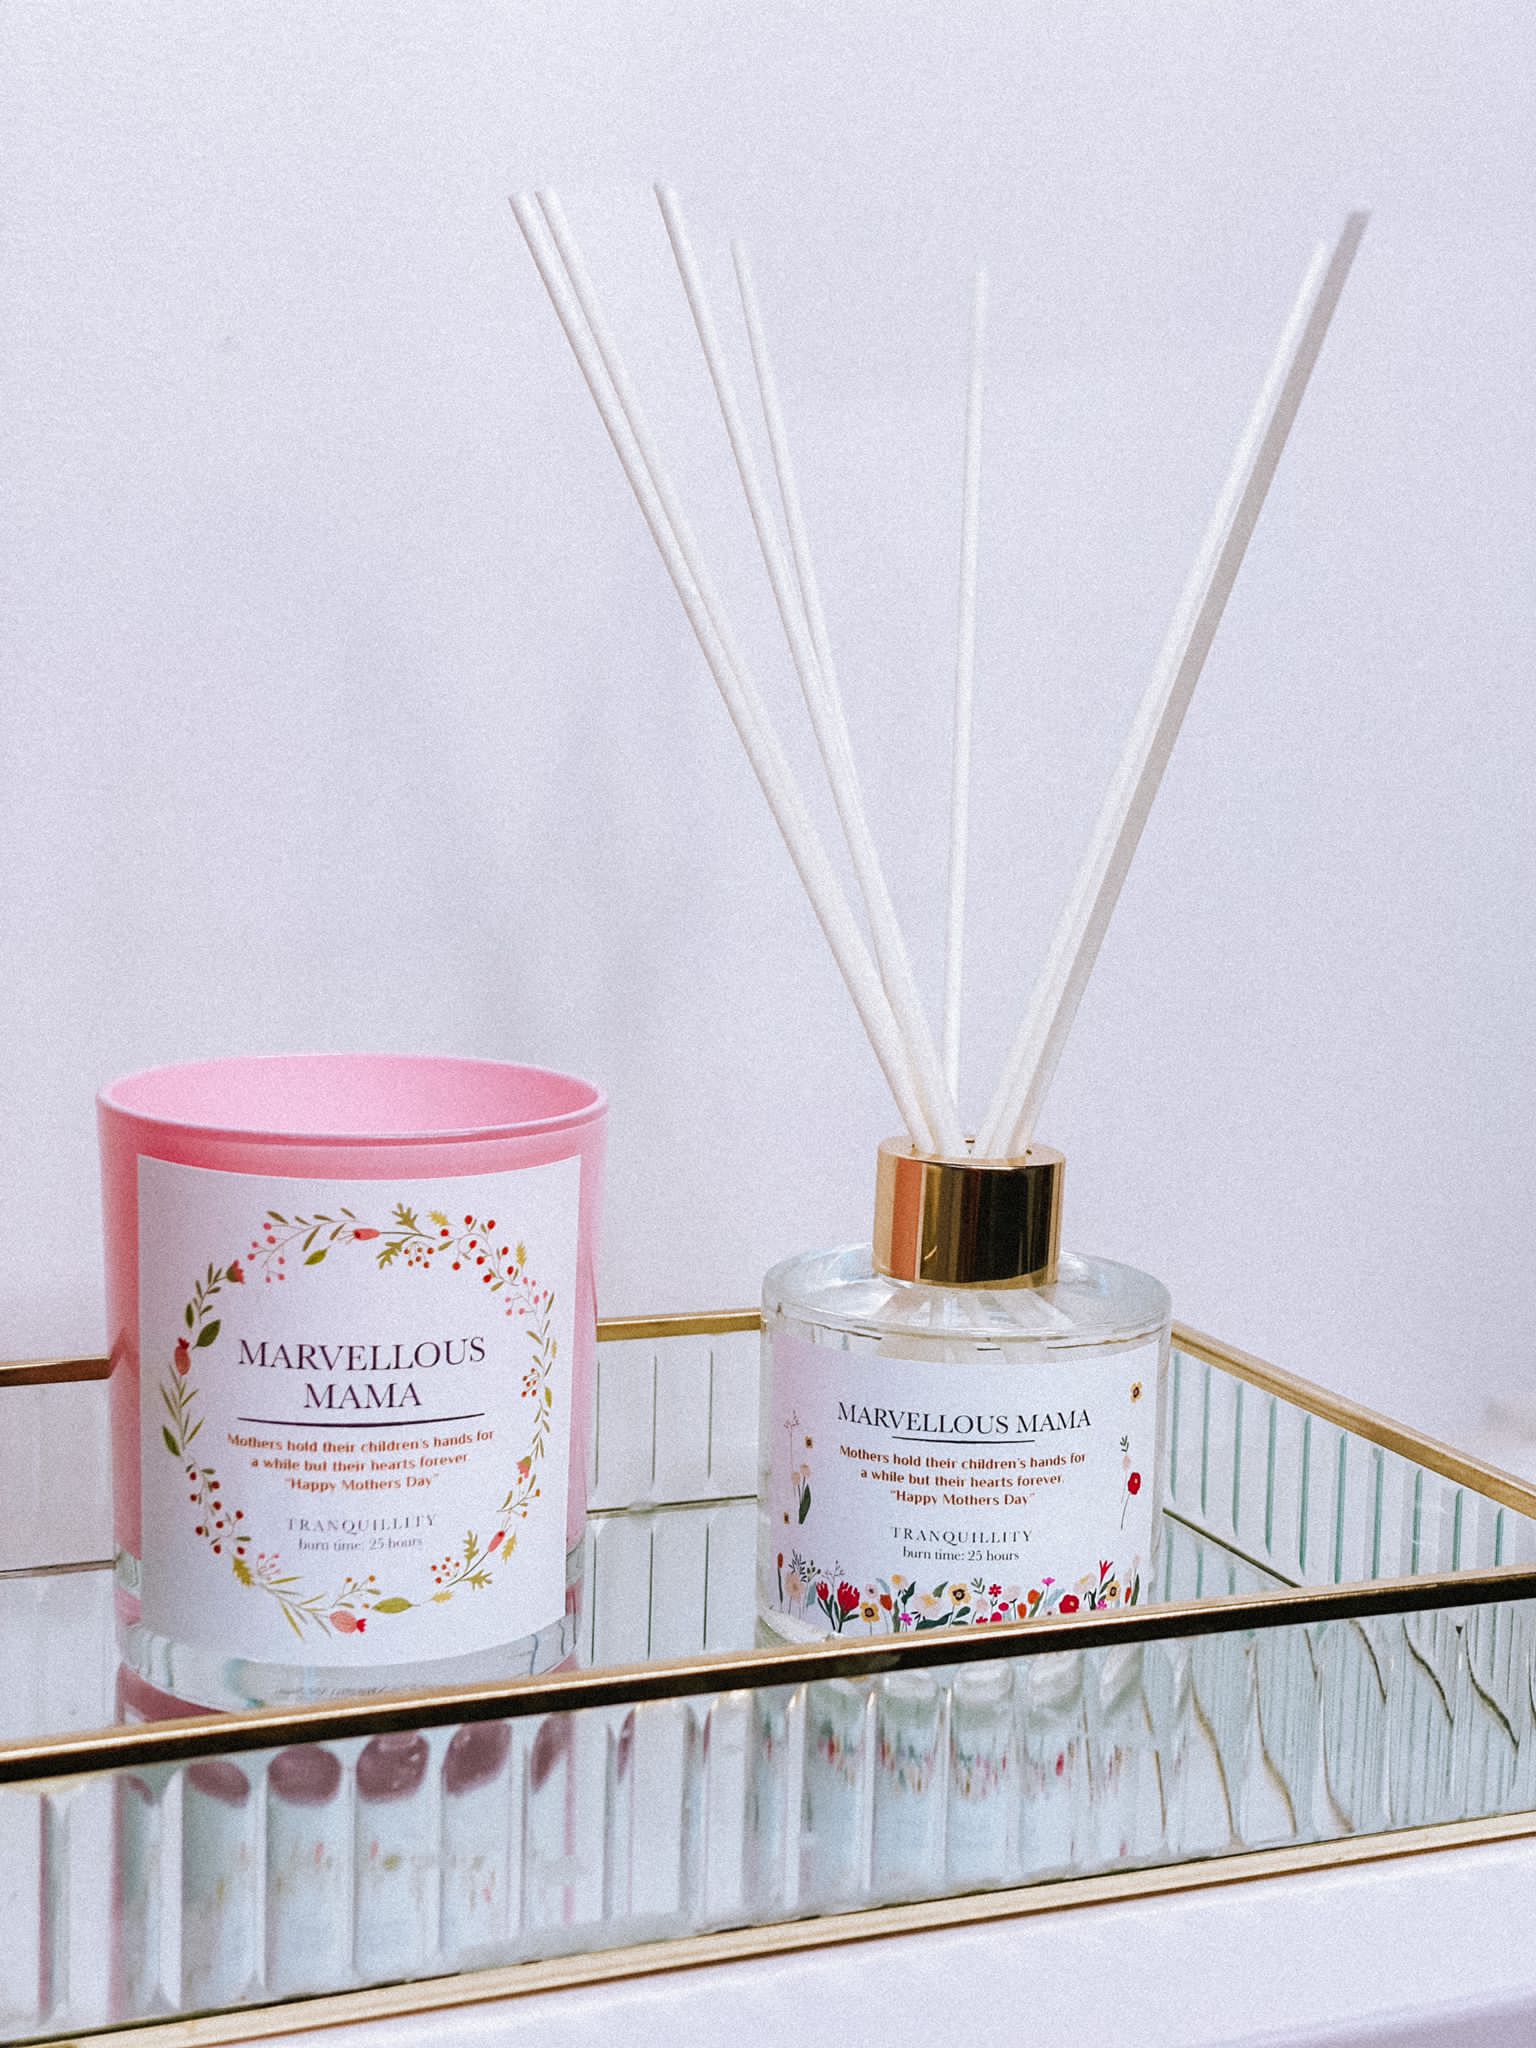 "Marvellous Mama" Reed Diffuser